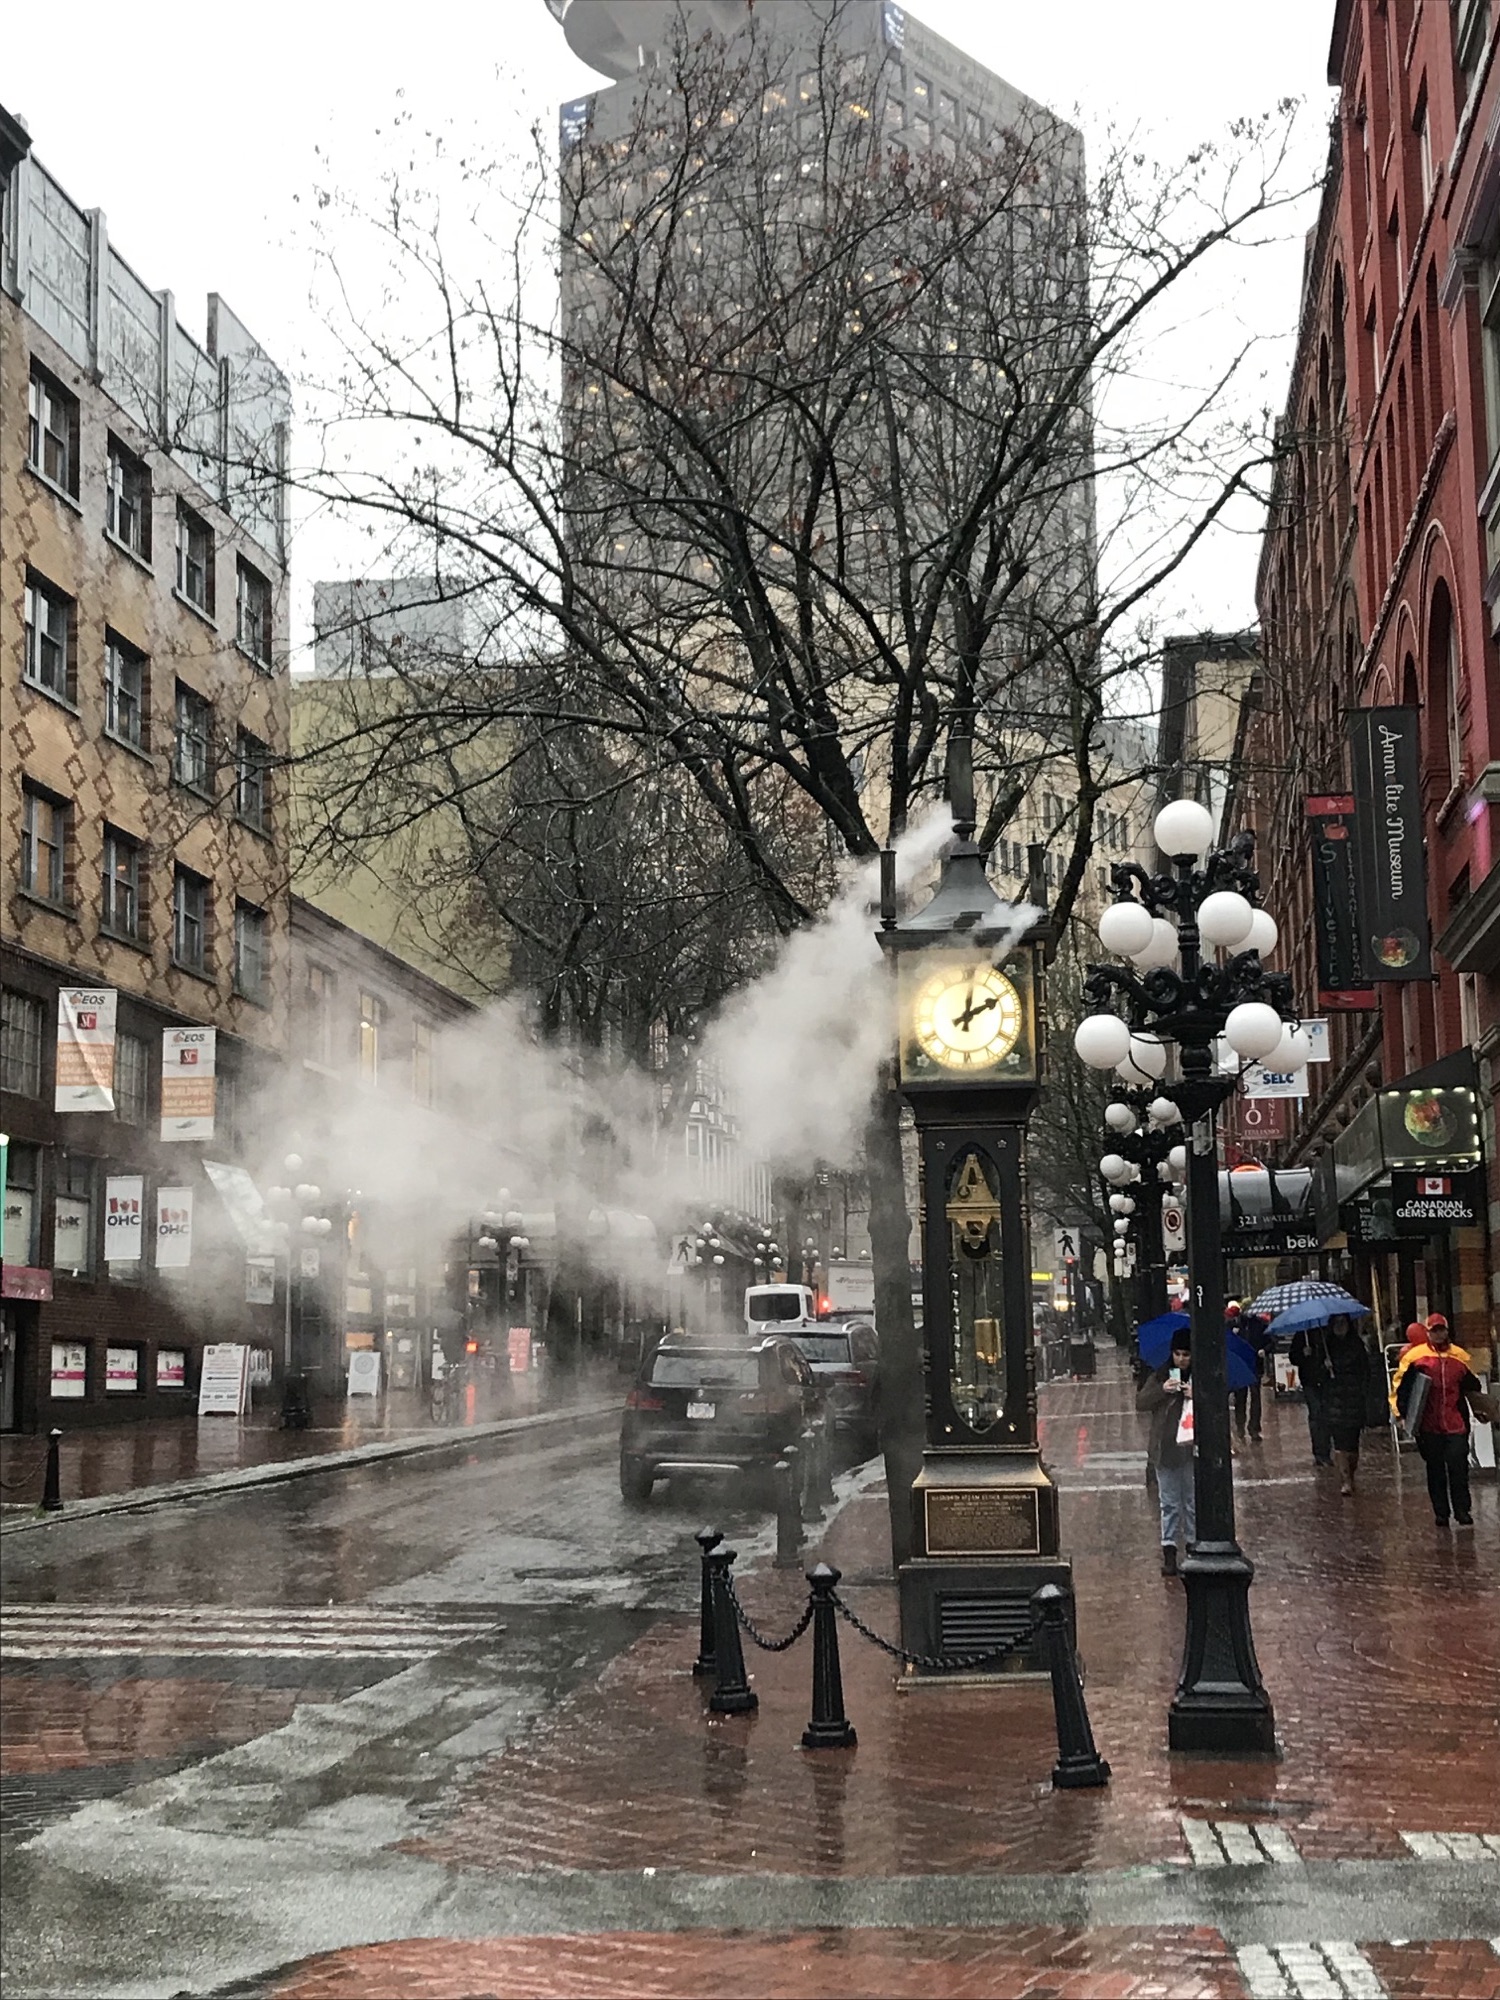 The Steam Clock in Gastown Vancouver